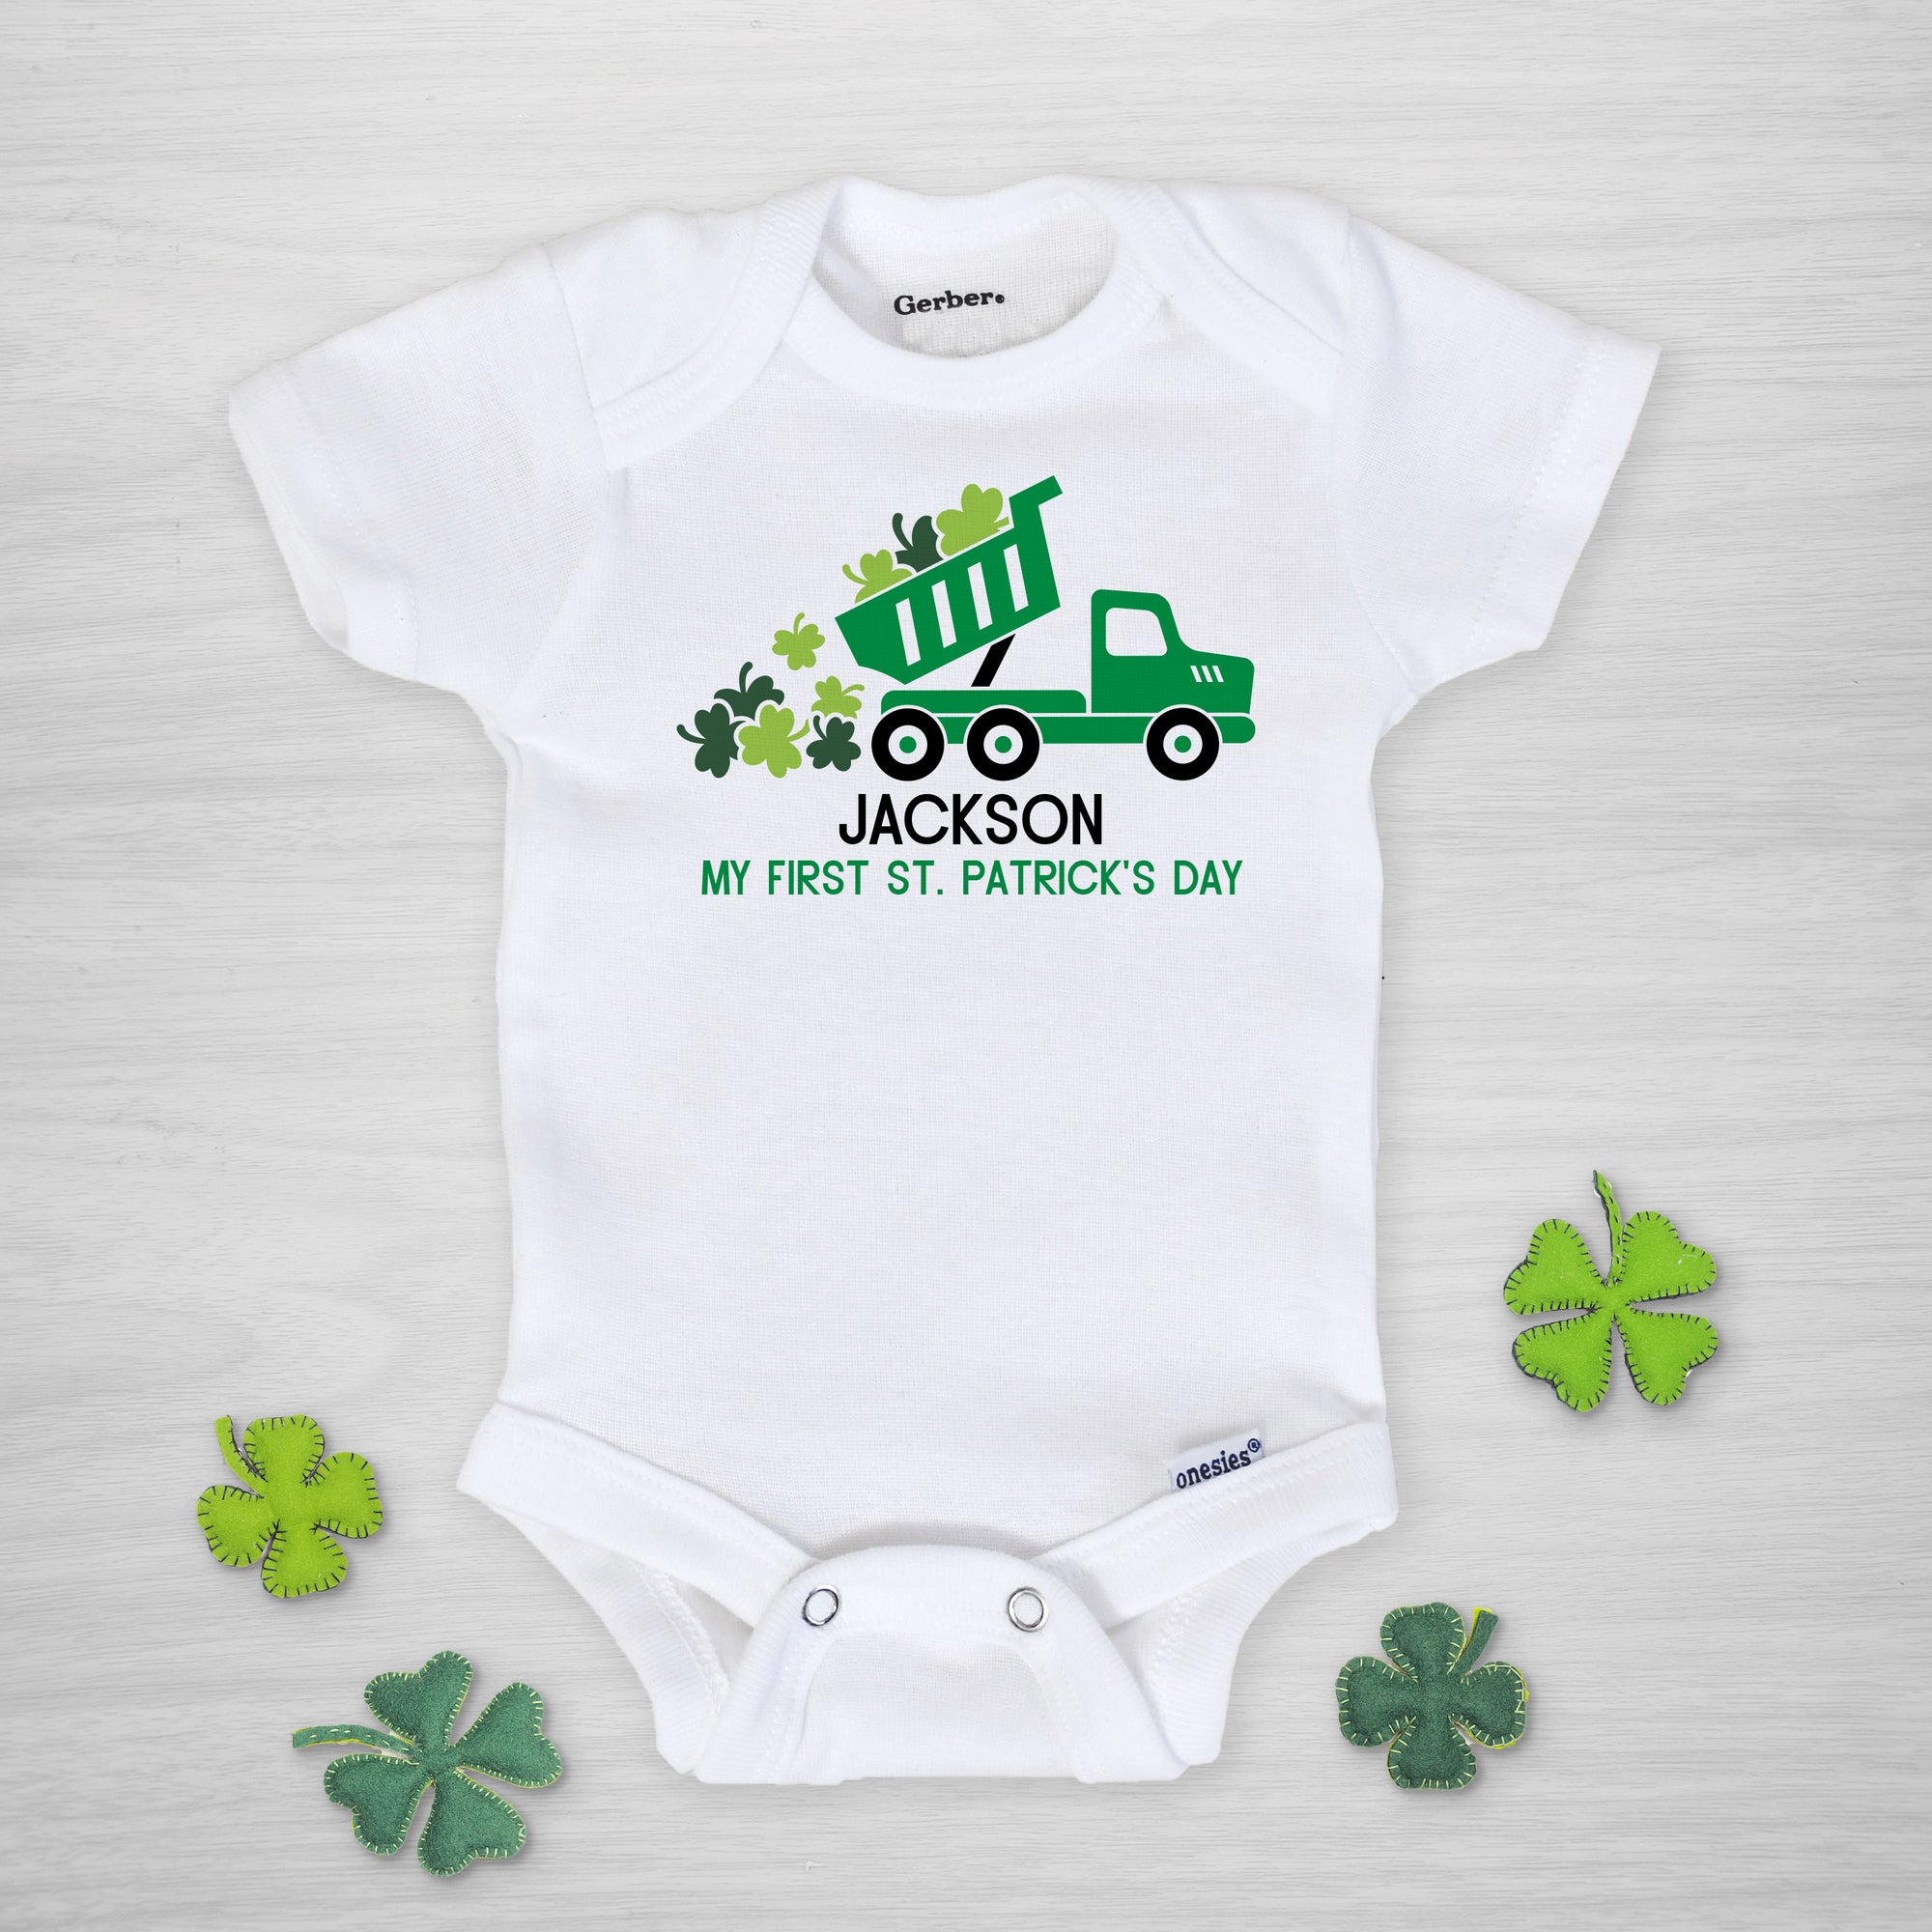 Dump Truck with Shamrocks St. Patrick's Day Personalized Gerber Onesie, short sleeved